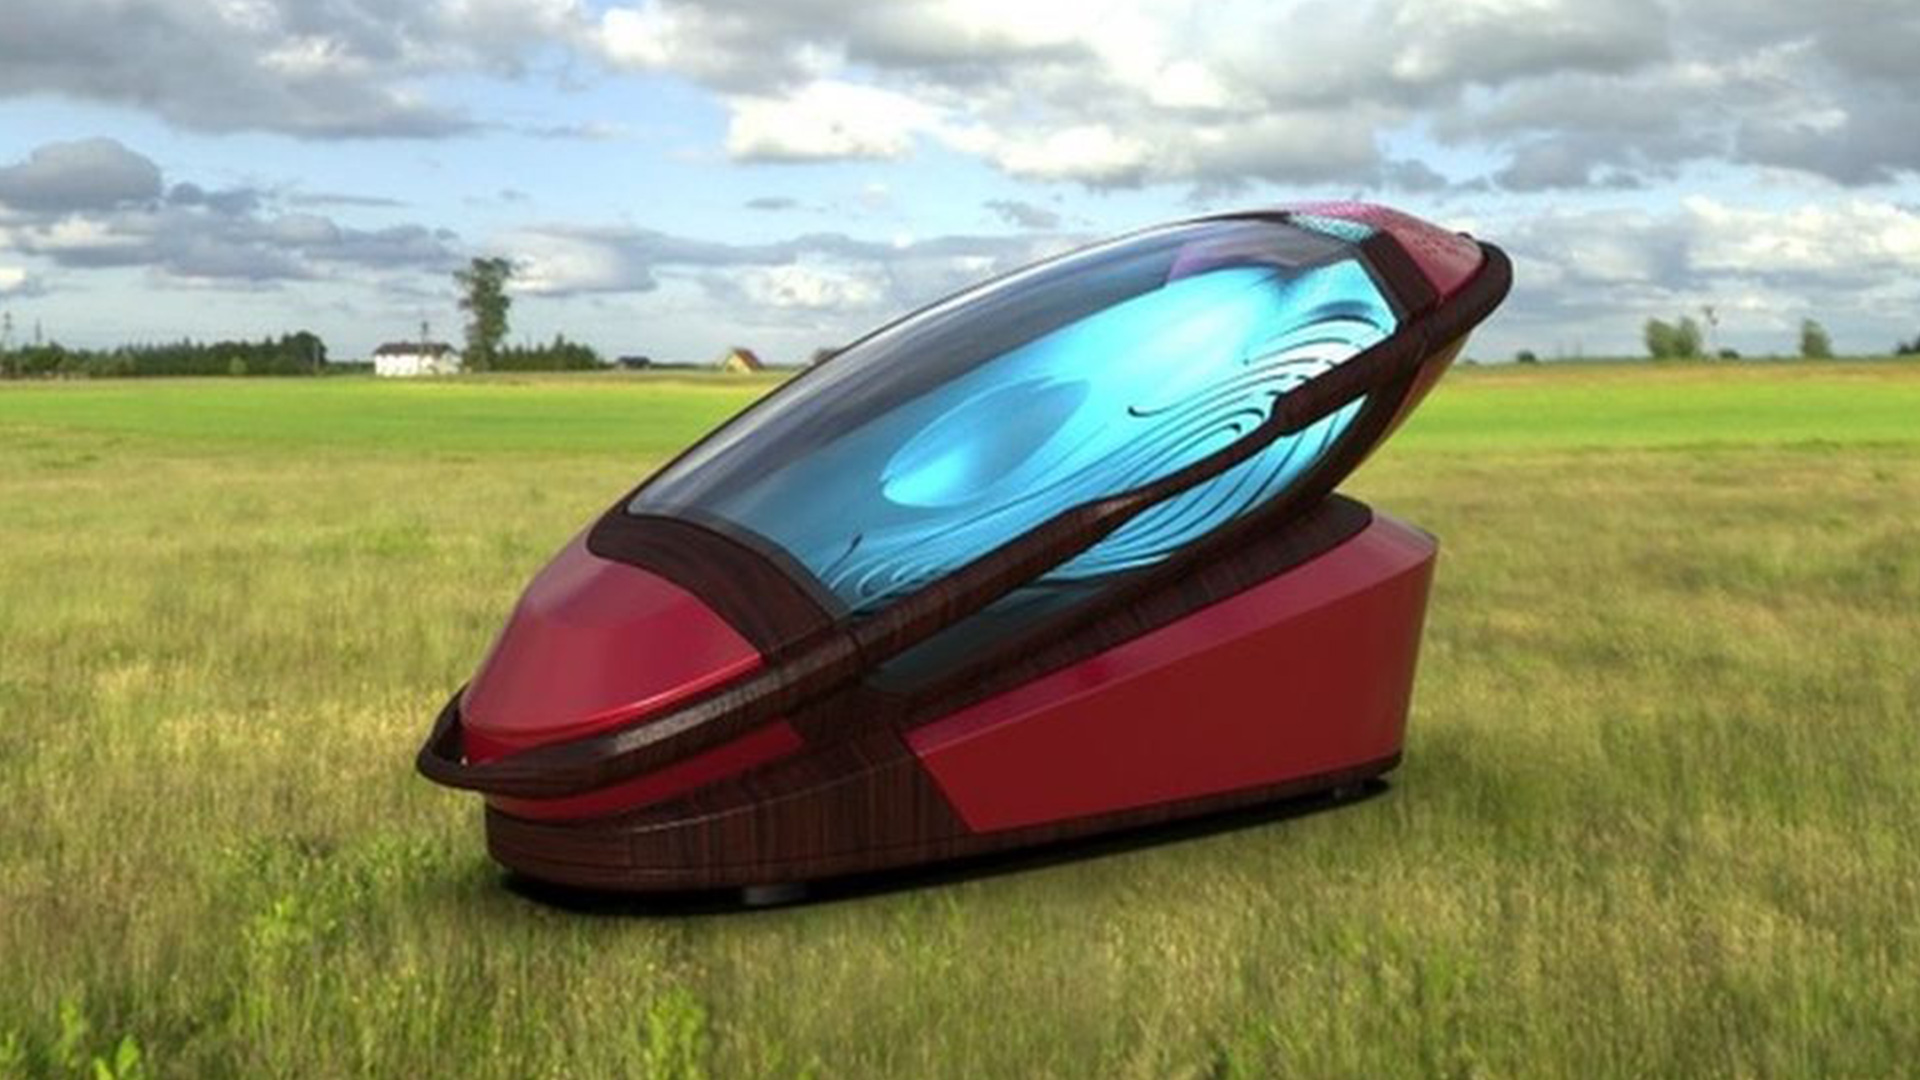  The pod can be 3D printed and placed anywhere - BBC